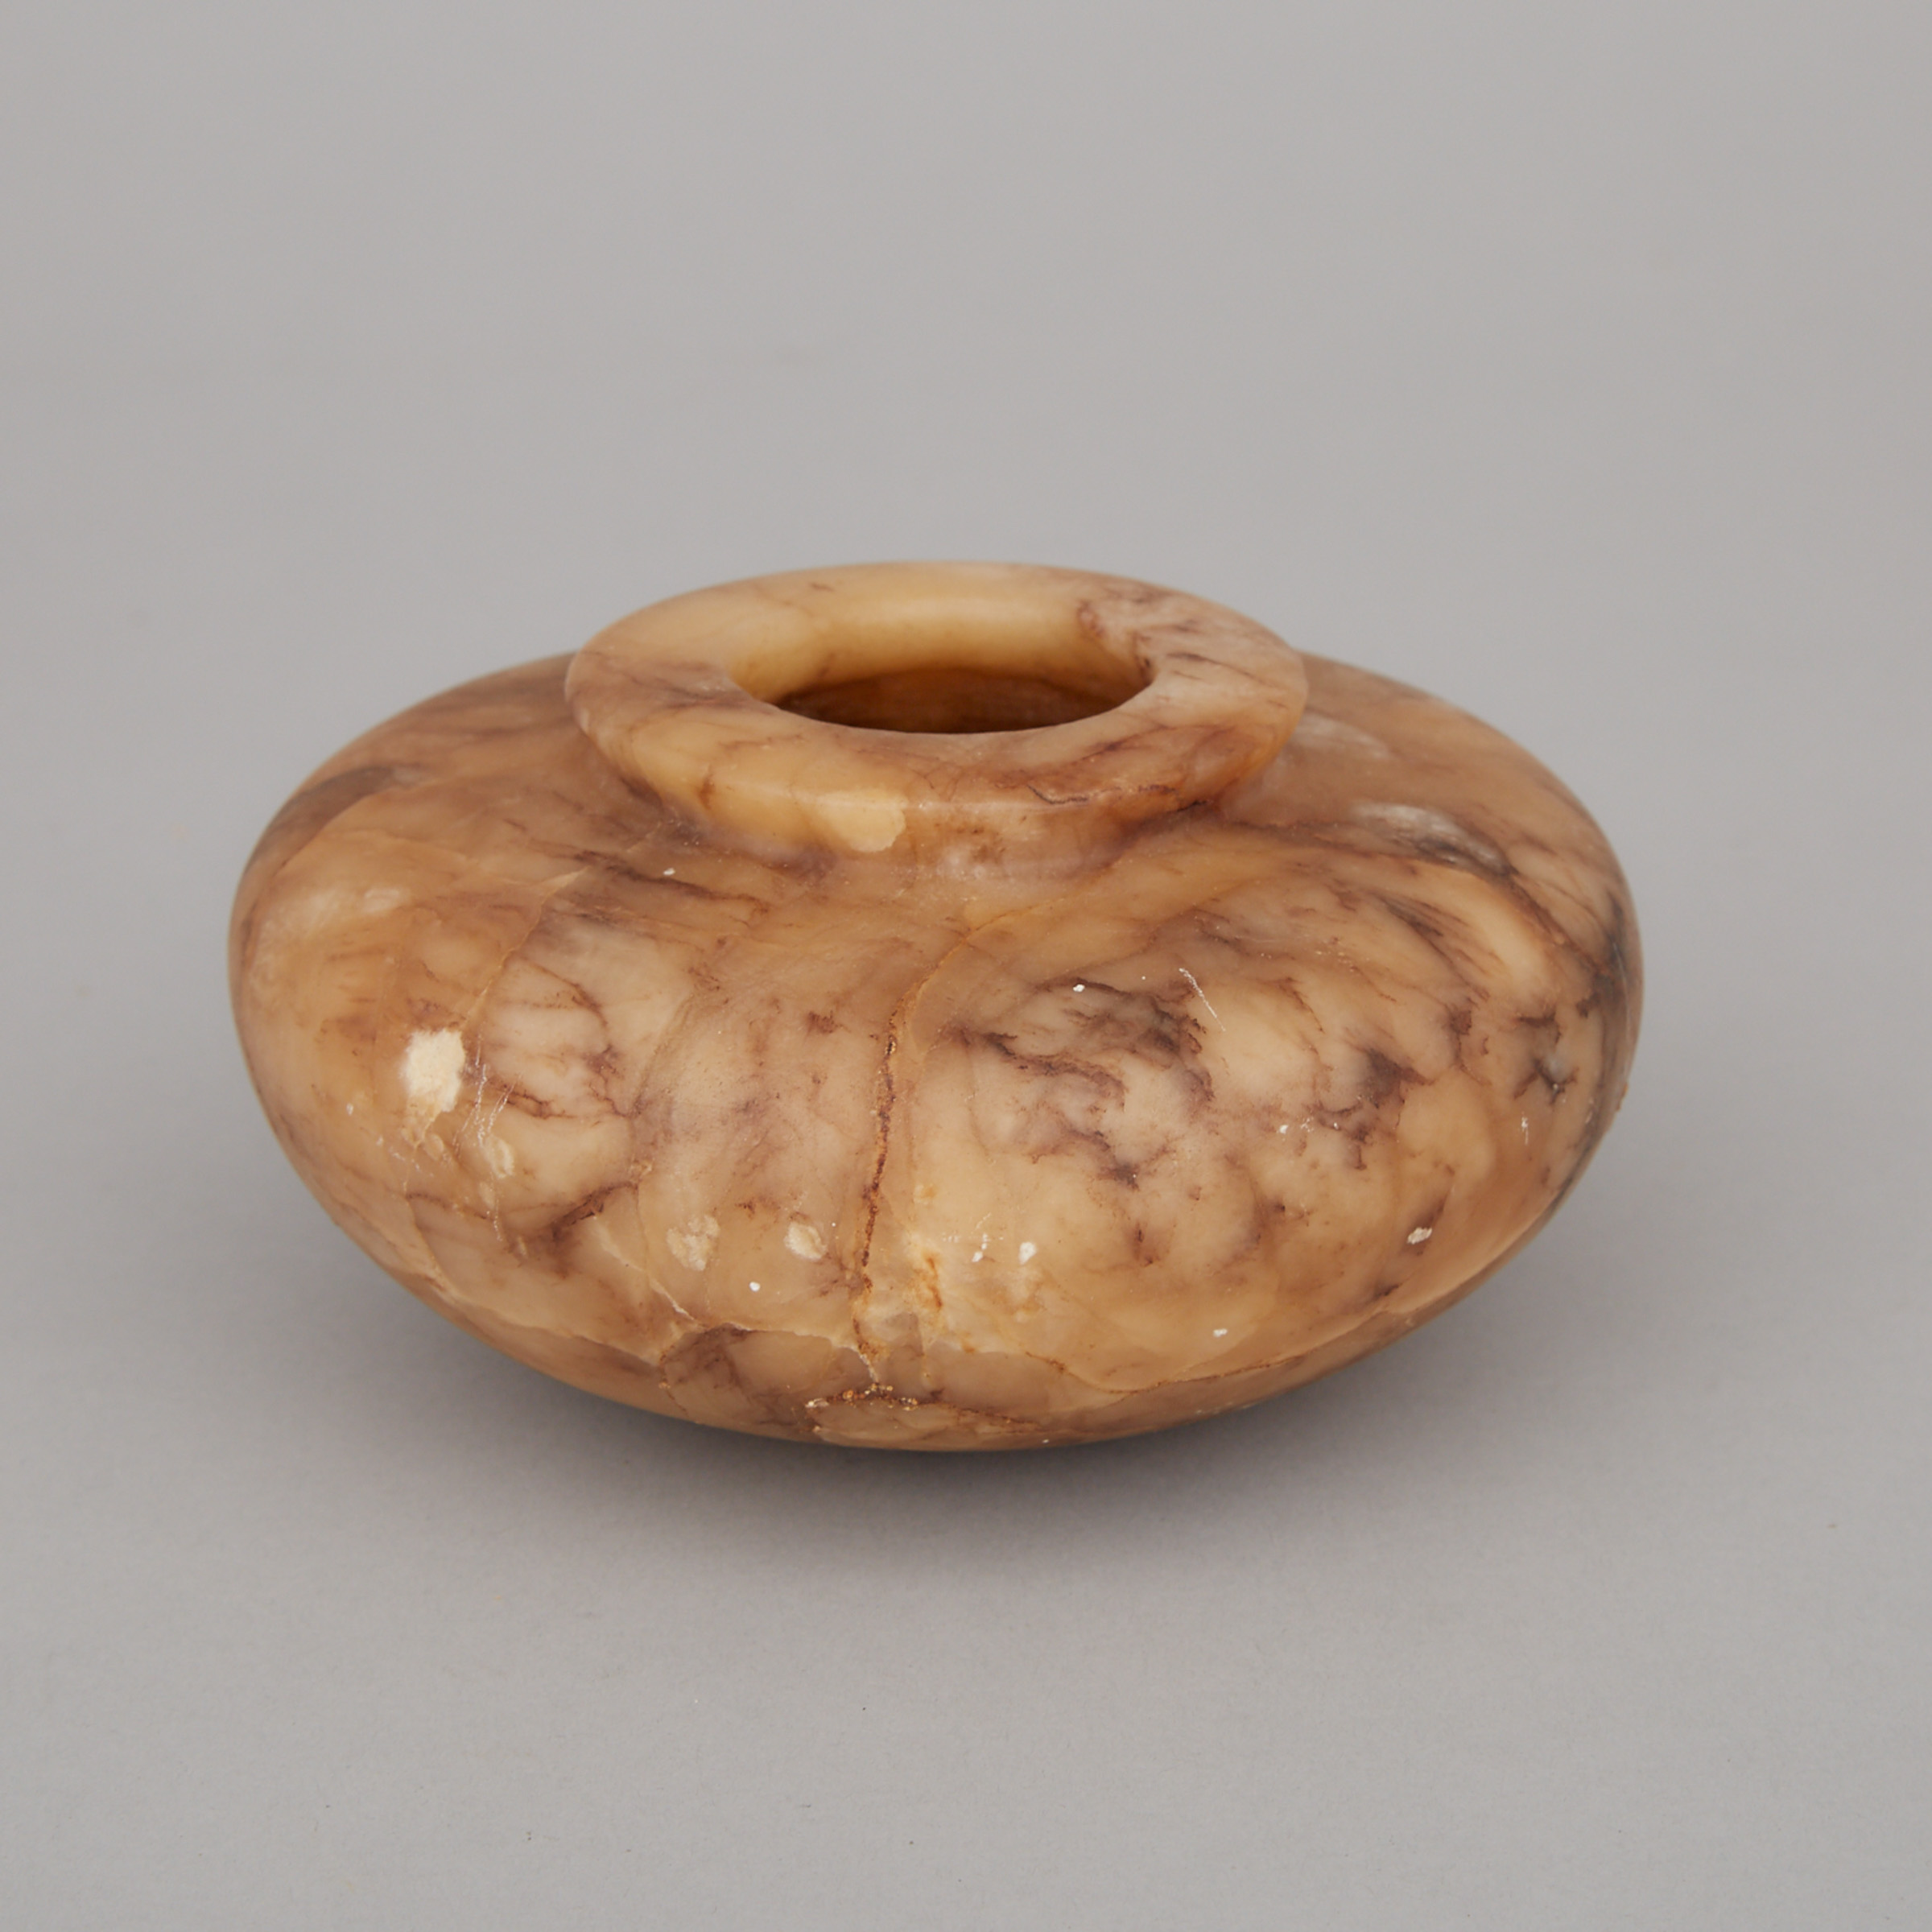 Egyptian Alabaster Vessel, Late Period, 664–332 B.C.